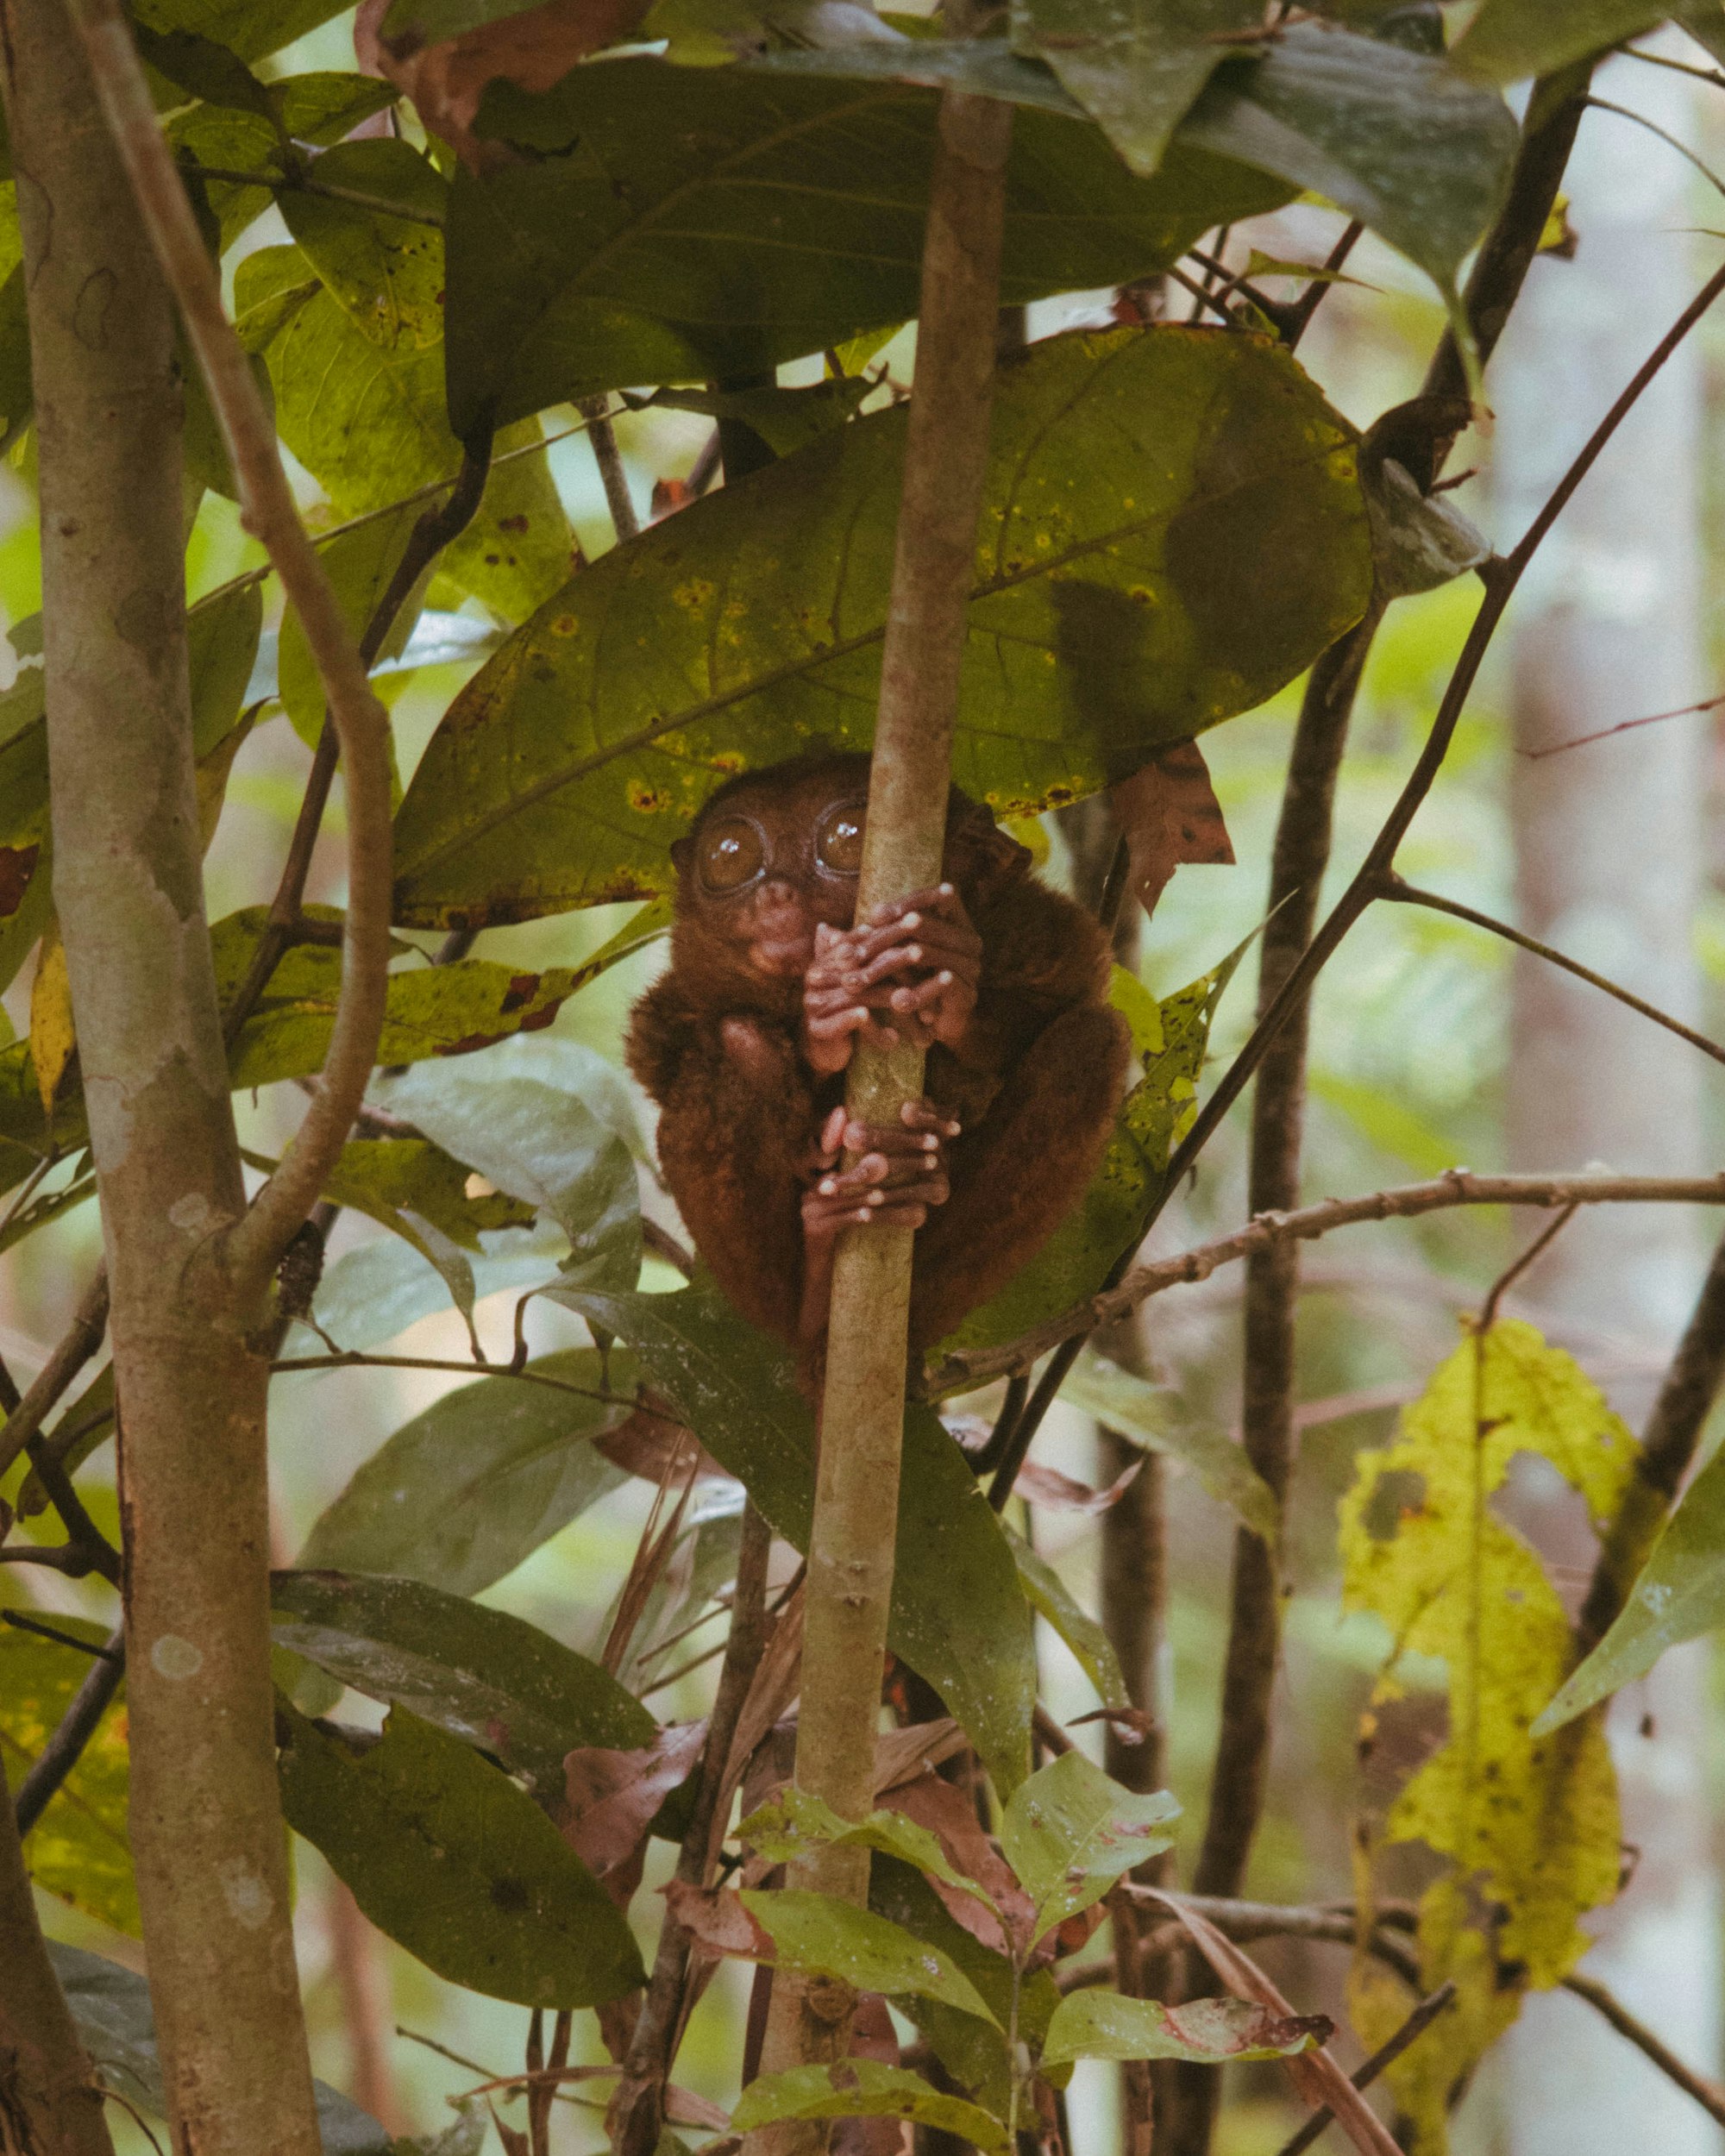 A tarsier clinging on to a small tree branch in Bohol, Philippines.